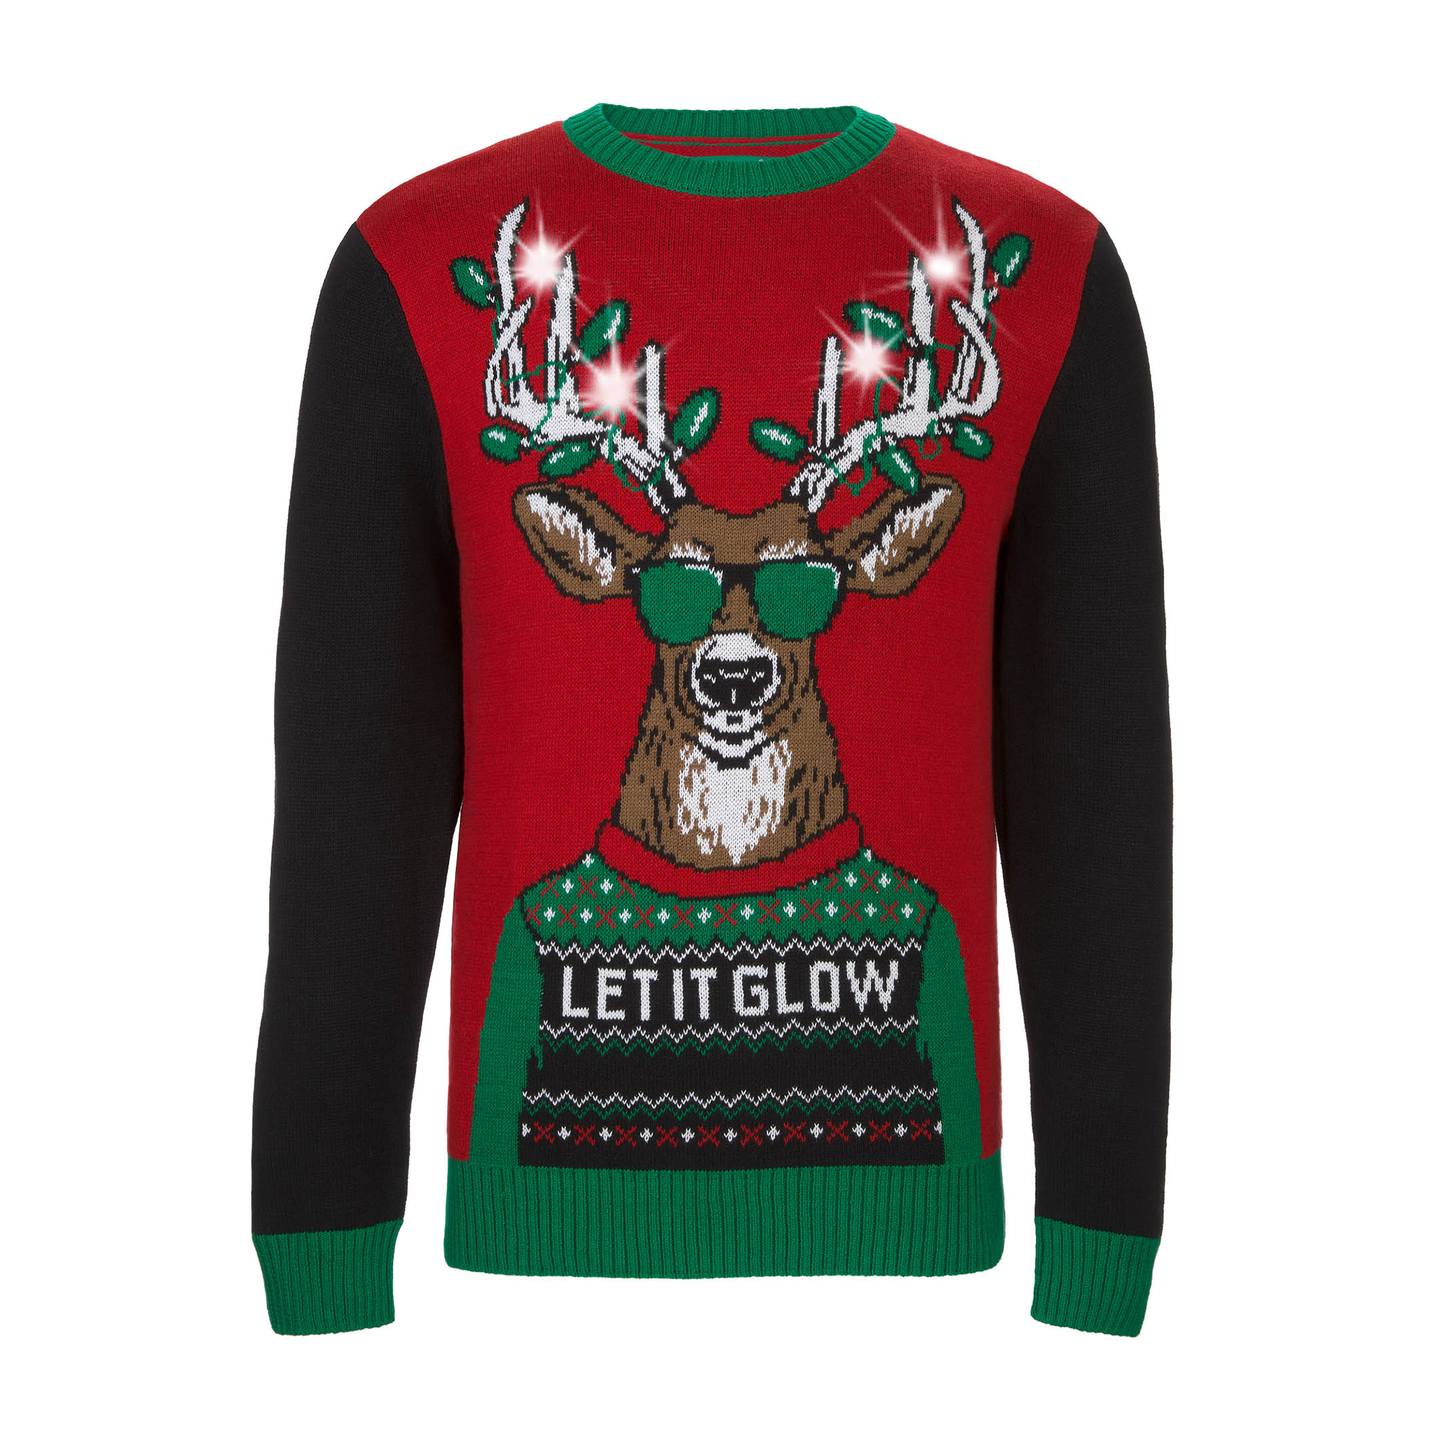 Let It Glow Reindeer LED Light-Up Ugly Christmas Sweater